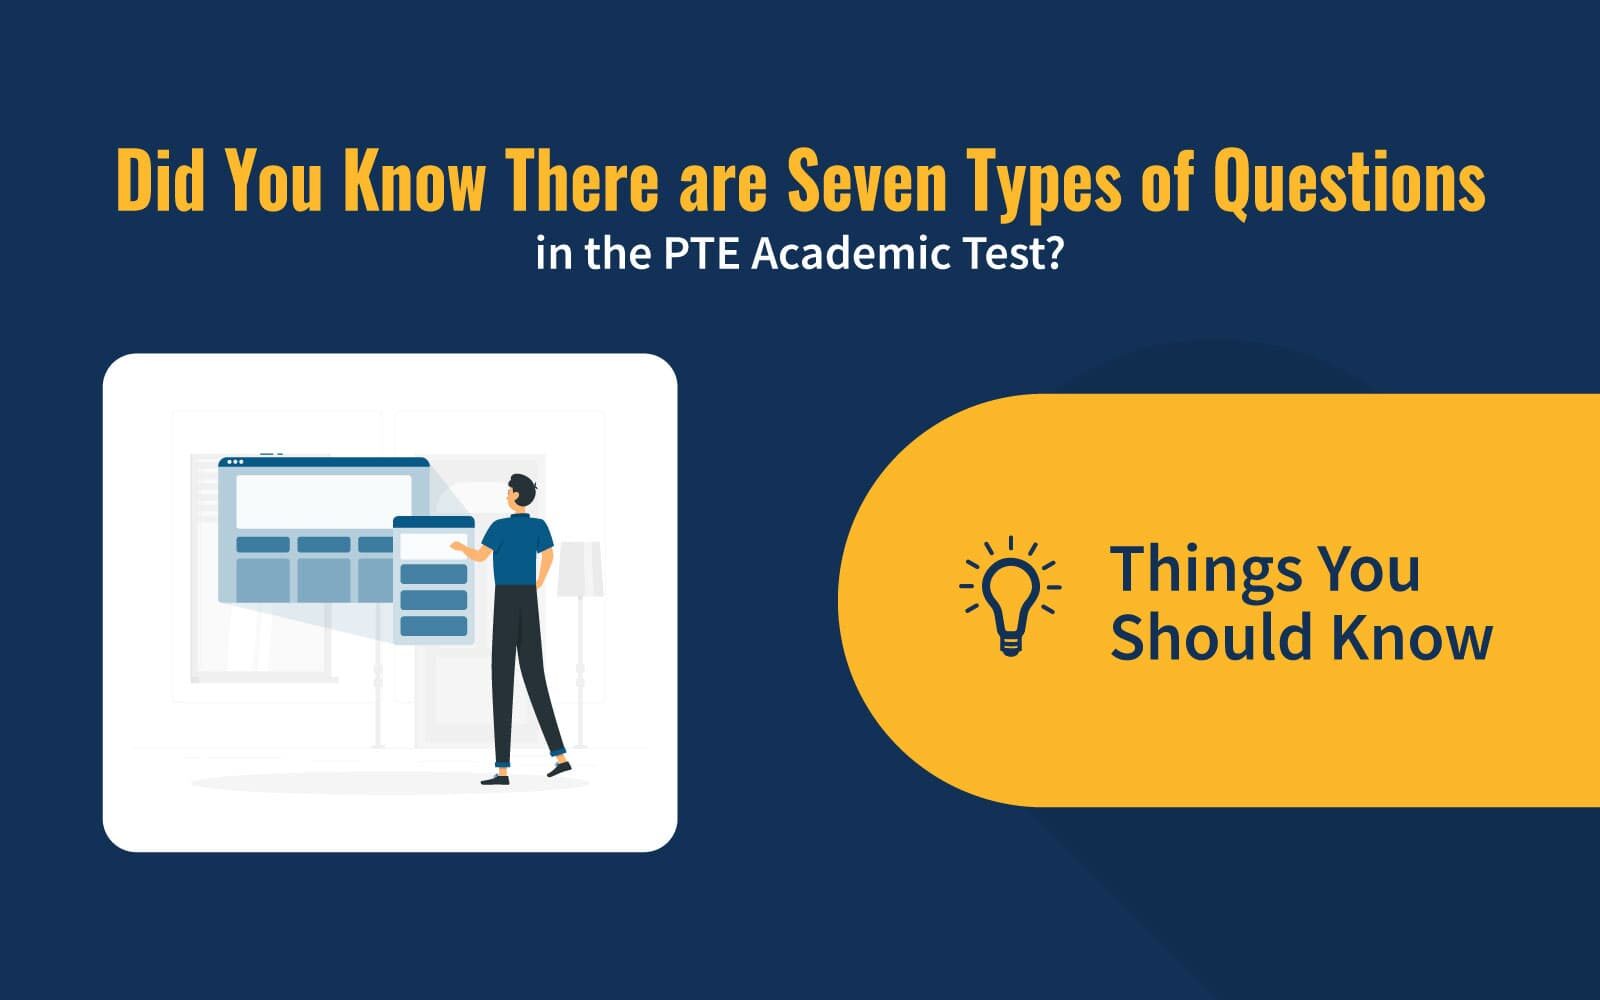 Did You Know There are Seven Types of Questions in the PTE Academic Test?